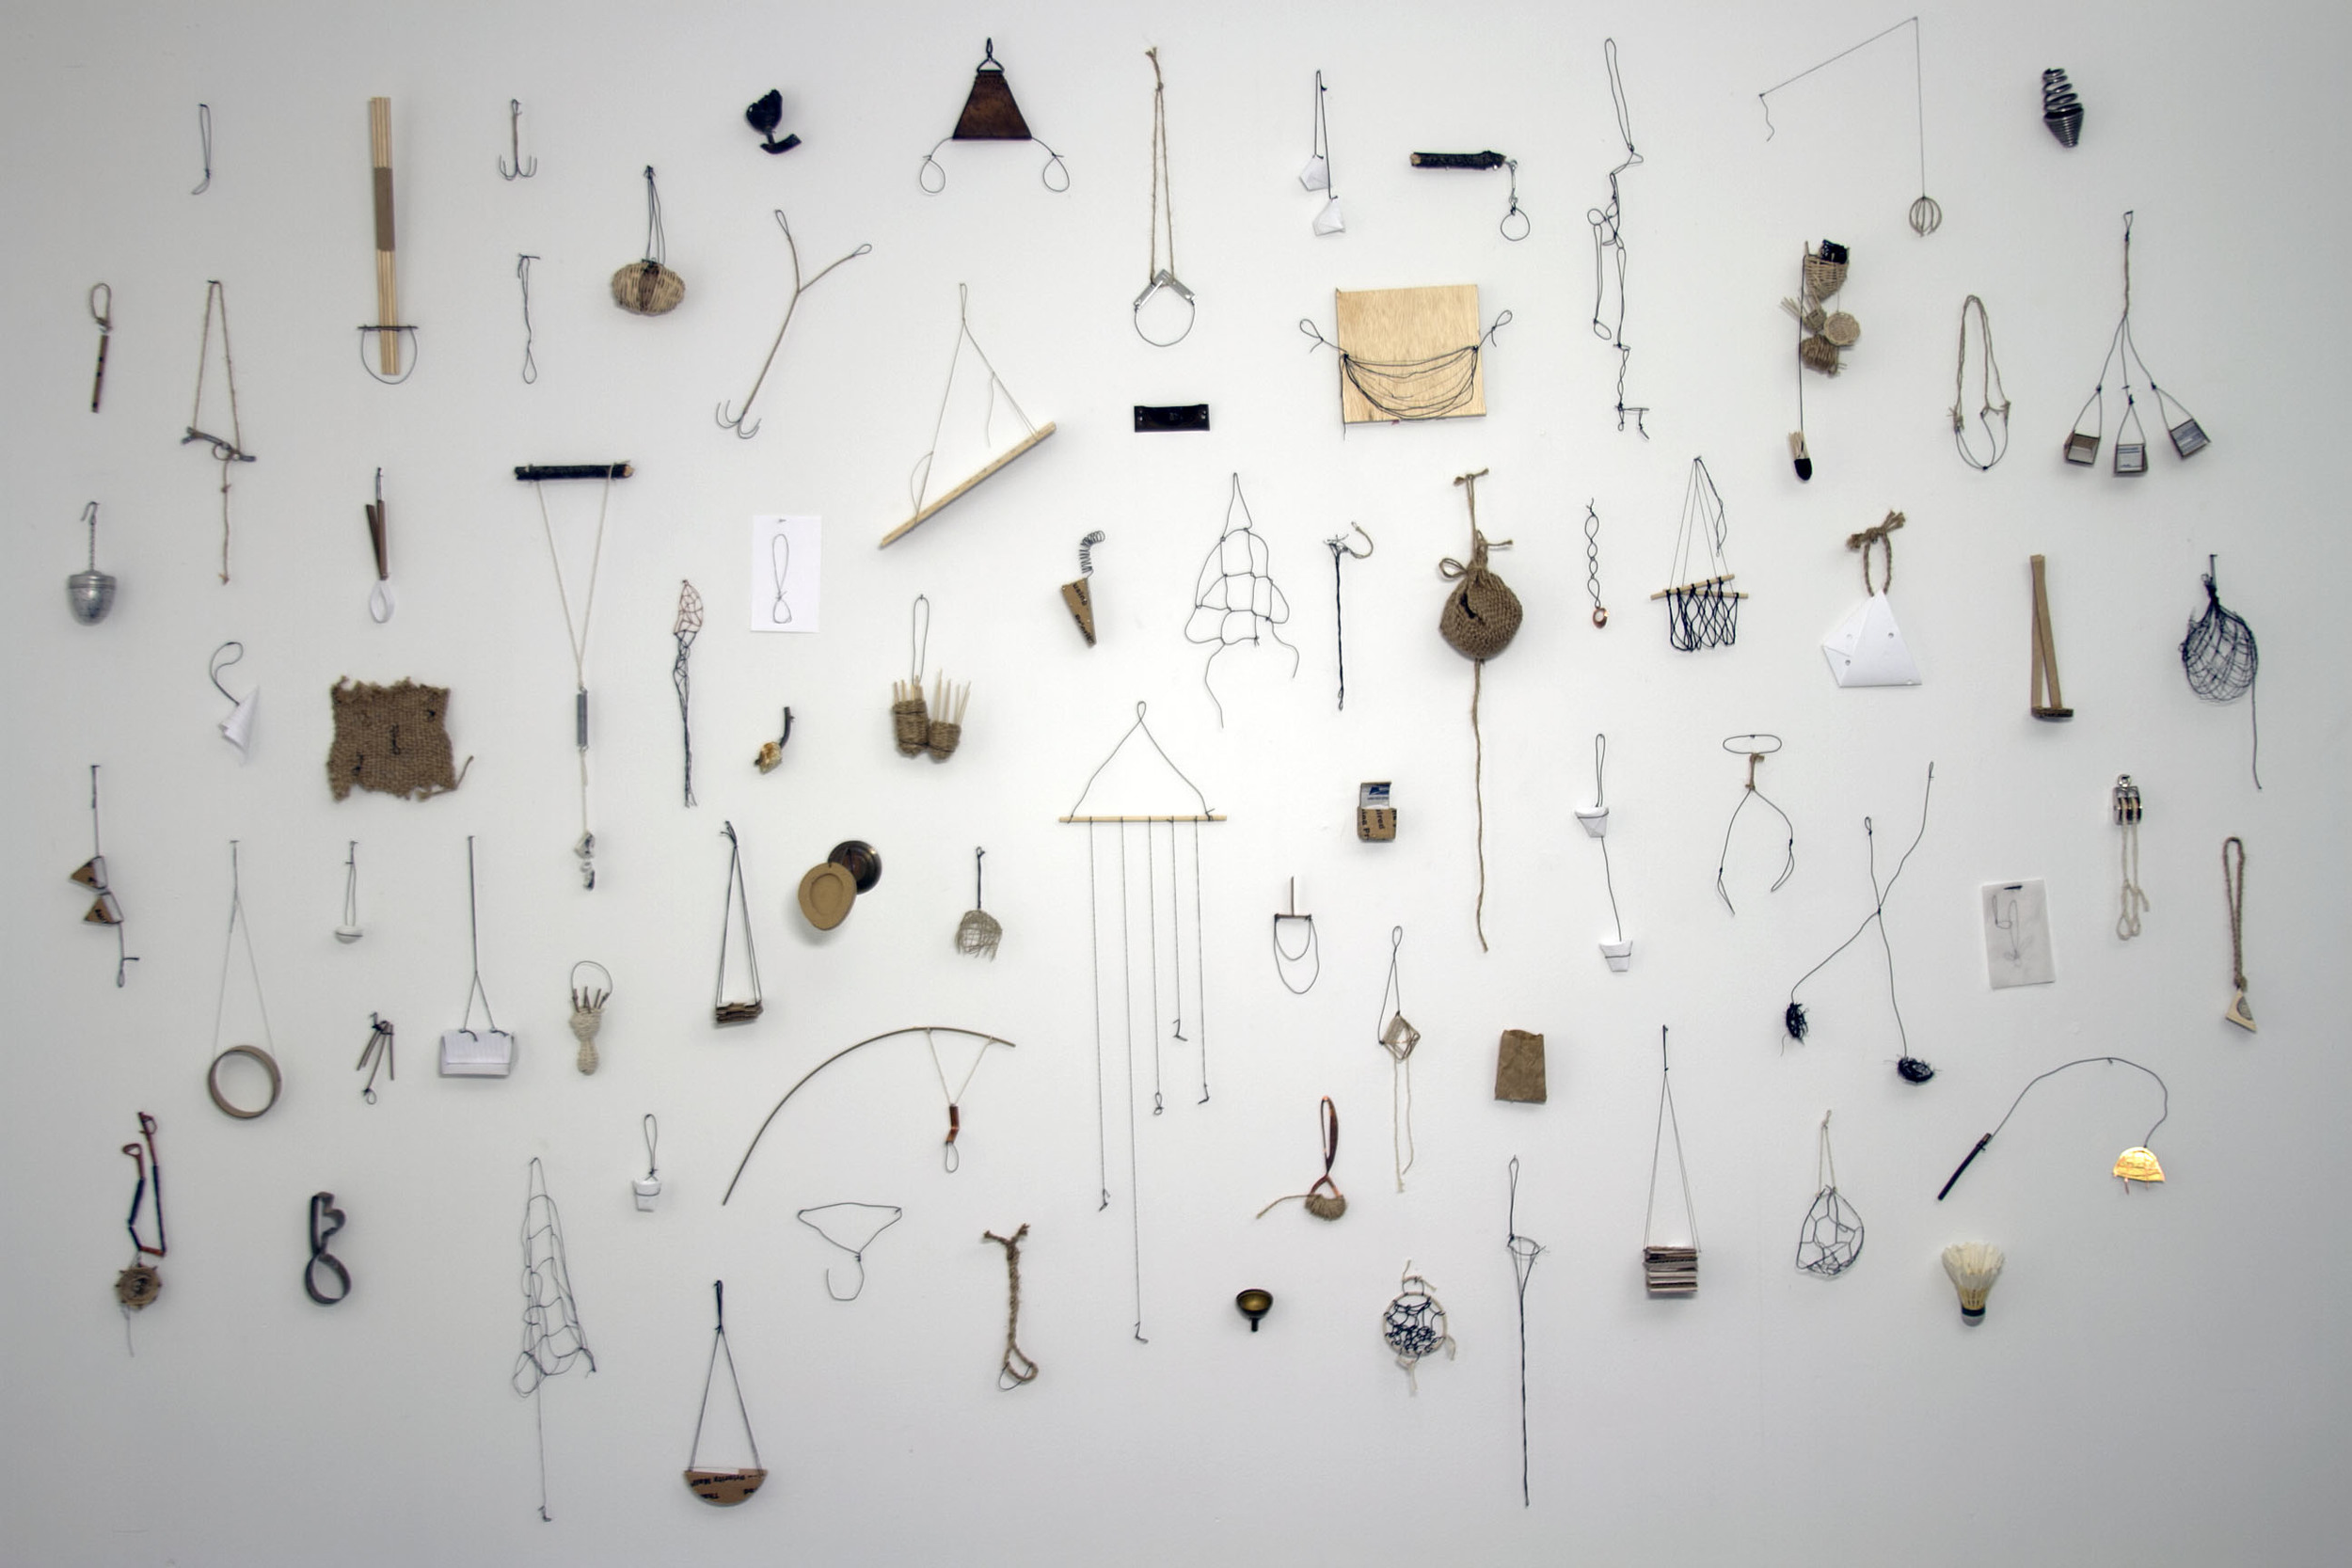   Spoon Collection,&nbsp; 2014. mixed media. installation, variable dimensions. 